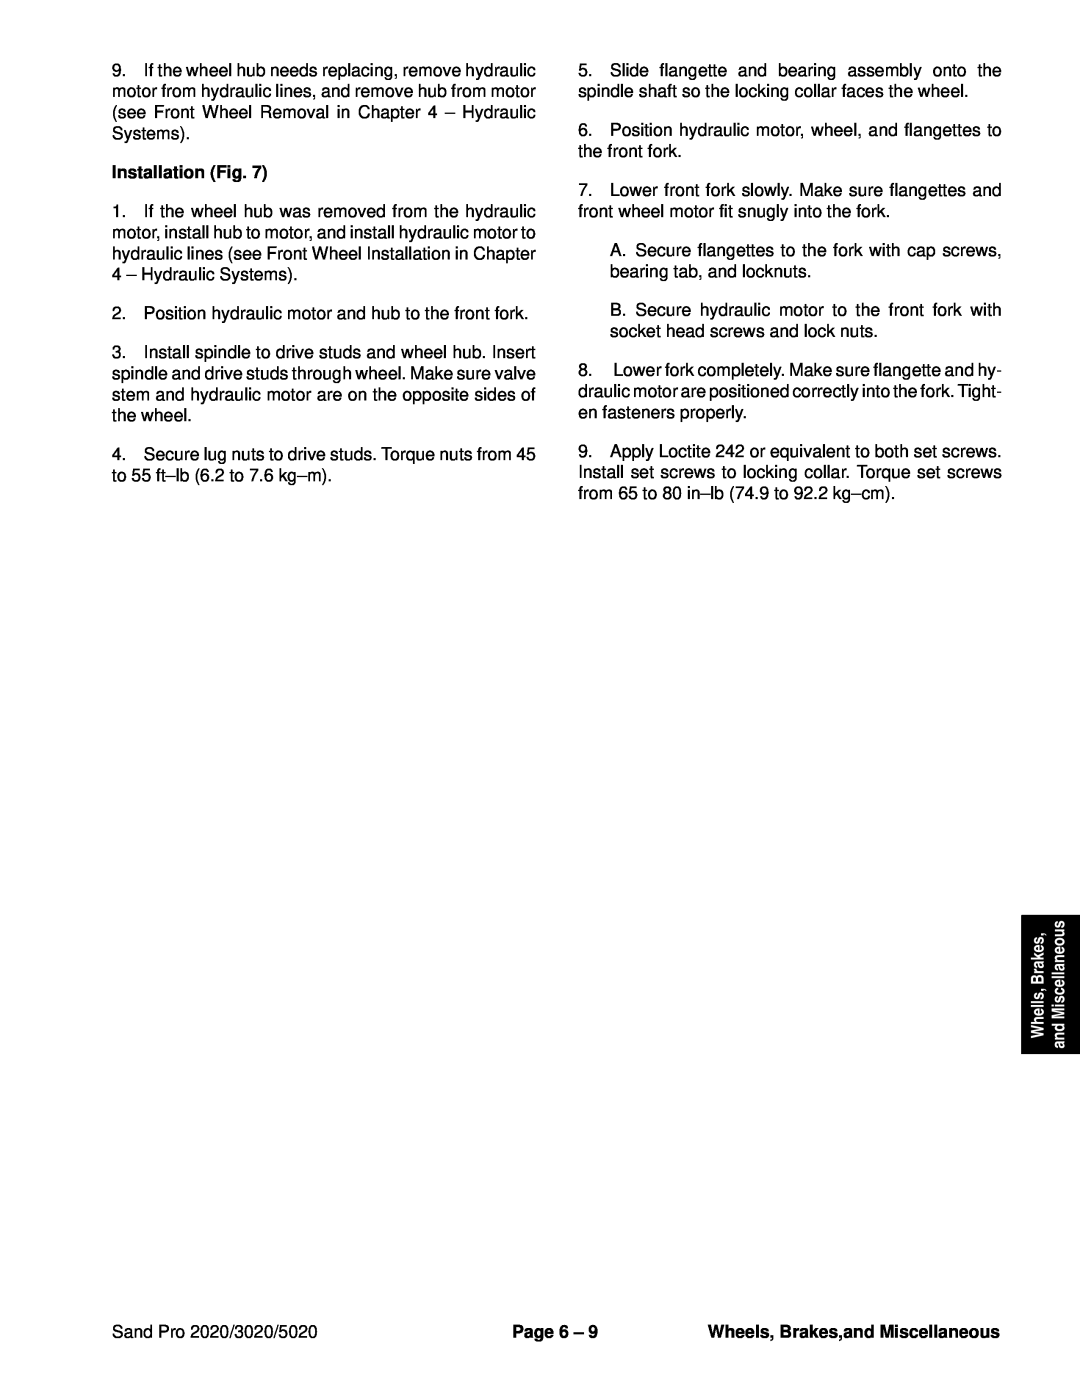 Toro service manual Installation Fig, Sand Pro 2020/3020/5020, Page 6, Wheels, Brakes,and Miscellaneous 